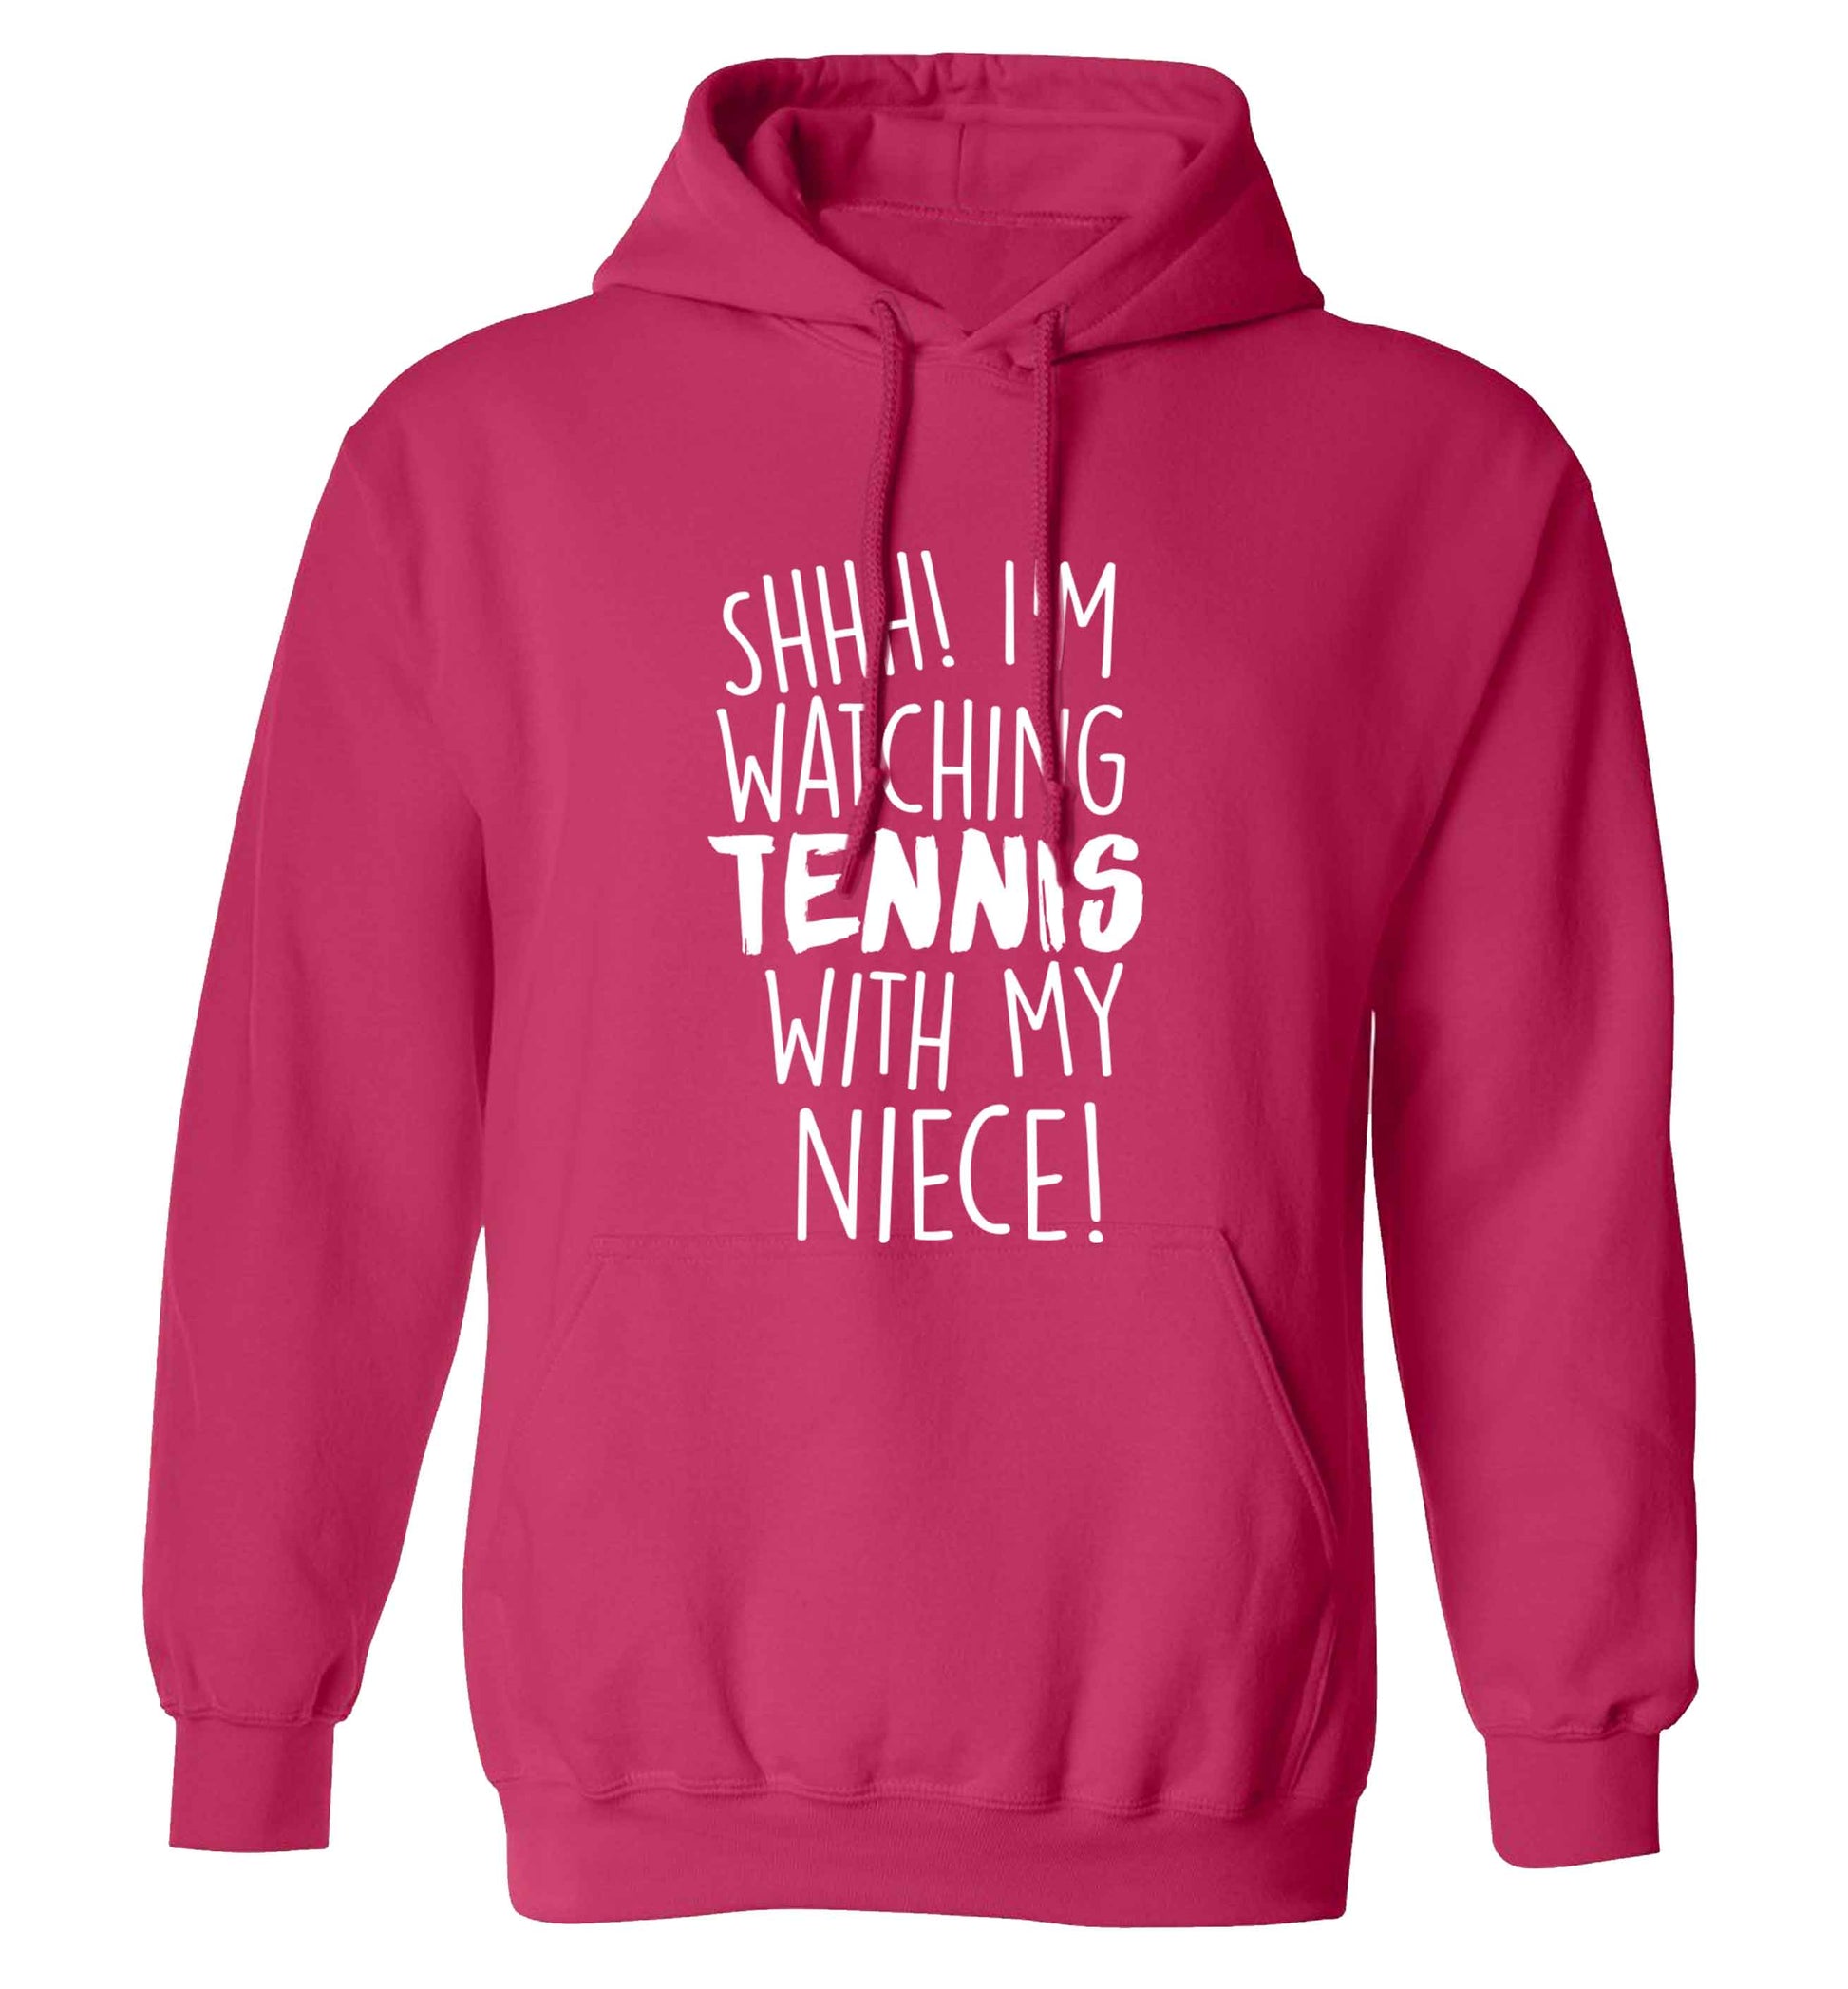 Shh! I'm watching tennis with my niece! adults unisex pink hoodie 2XL